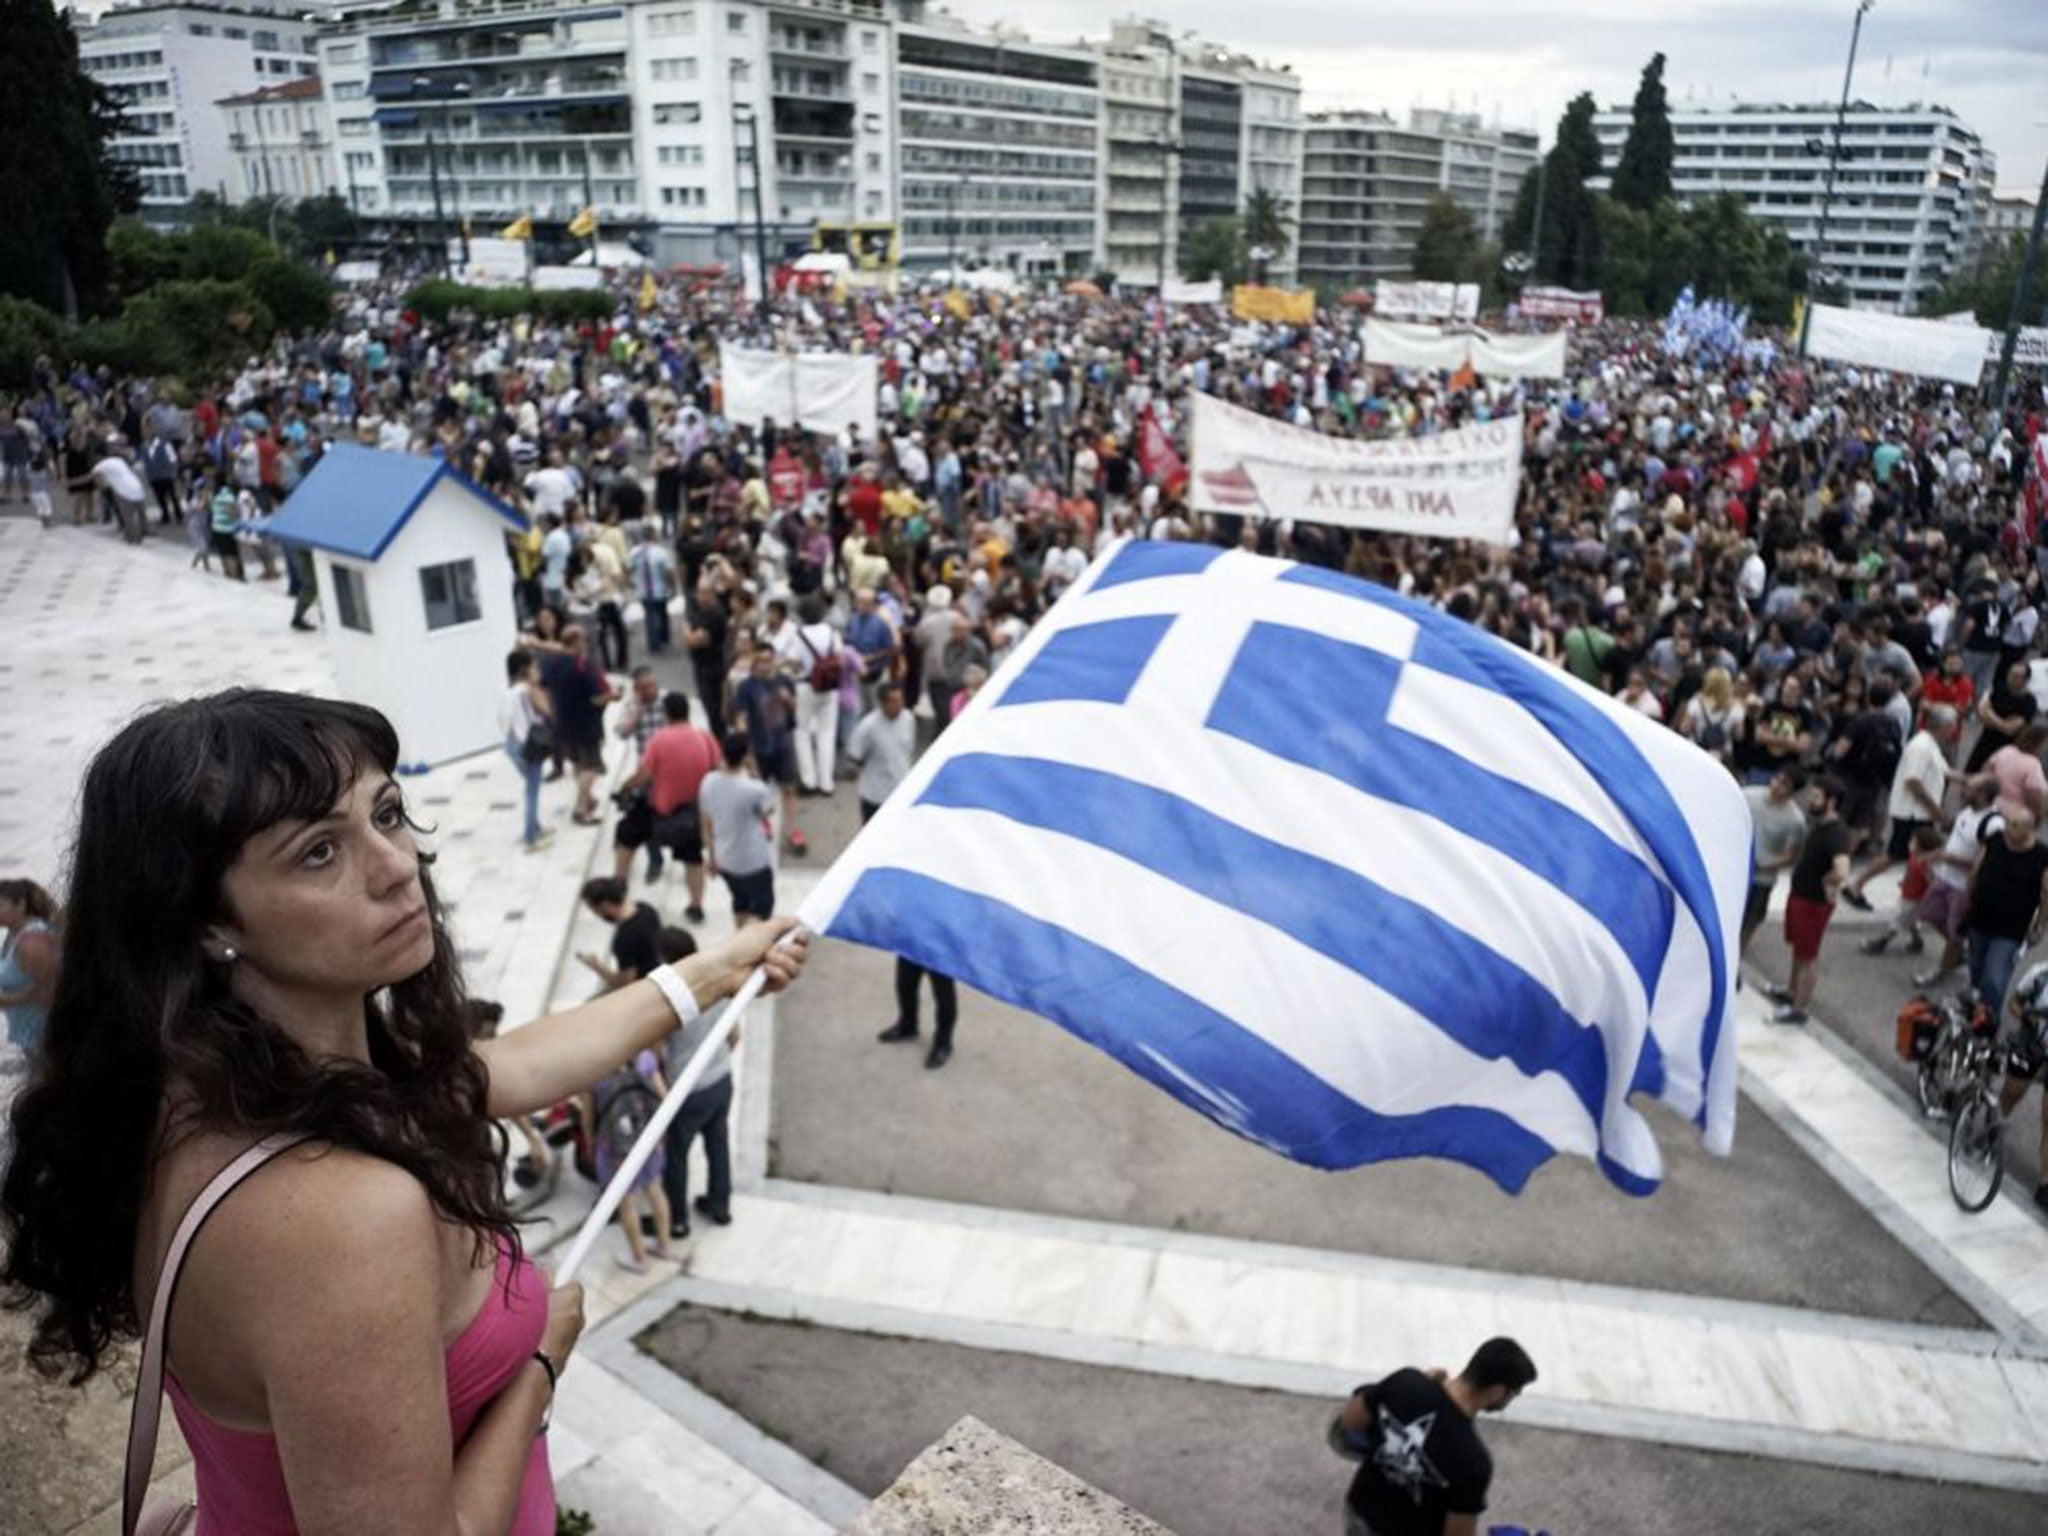 Protesters attend an anti-austerity pro-government rally in front of the parliament building